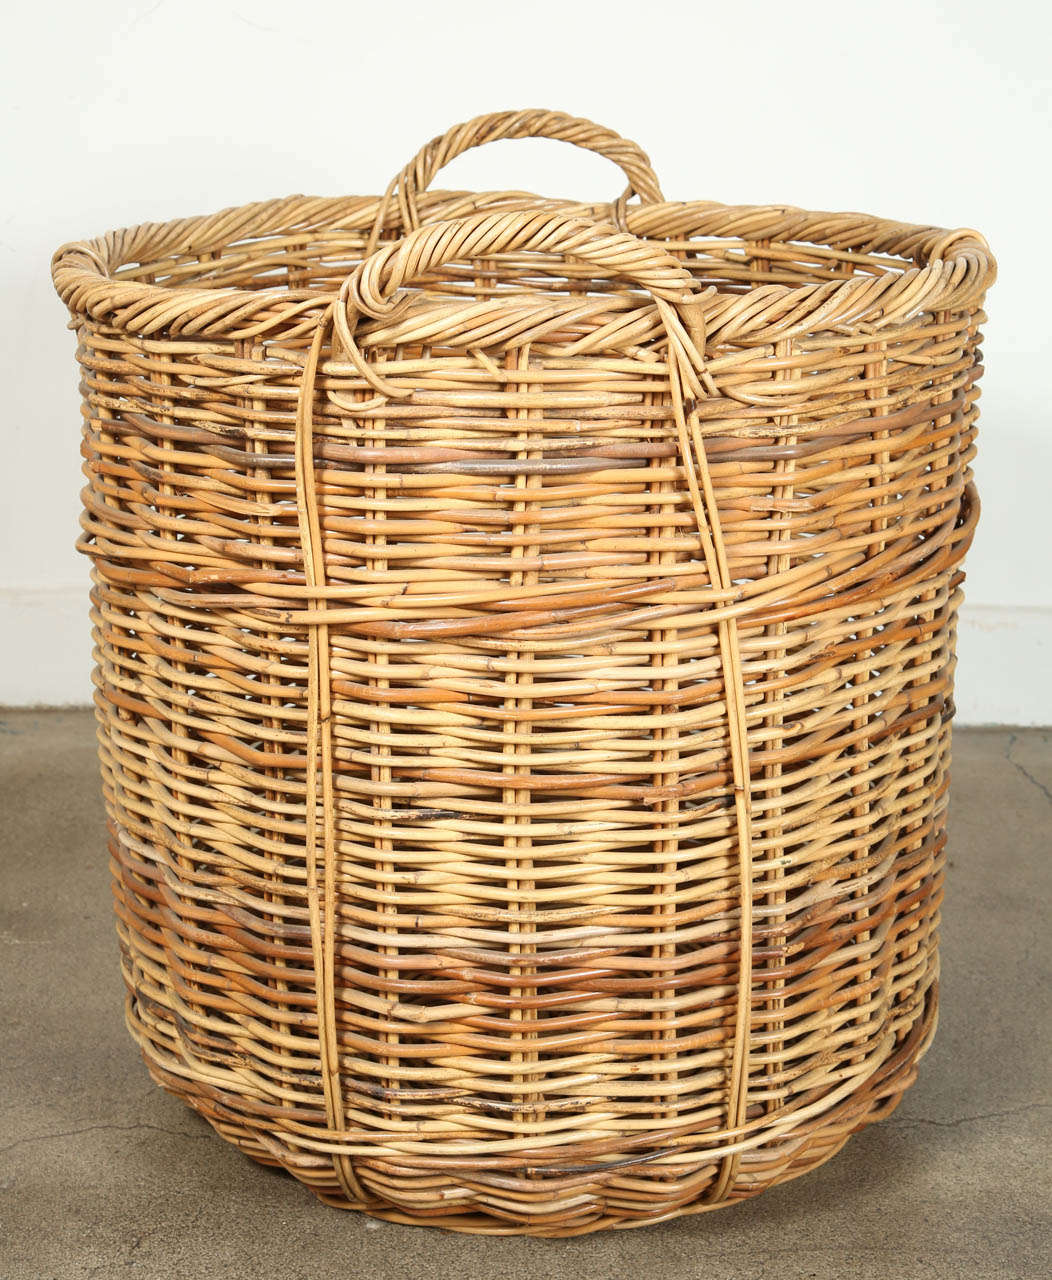 Classic oversize French wicker basket.
Hand-made and in superb condition.

Mosaik provides Antiques in Moorish style, Spanish, African Tribal Art, Islamic Art, Arabian style furniture, Middle Eastern, Egyptian, Syrian Style, Indian, Indonesian,